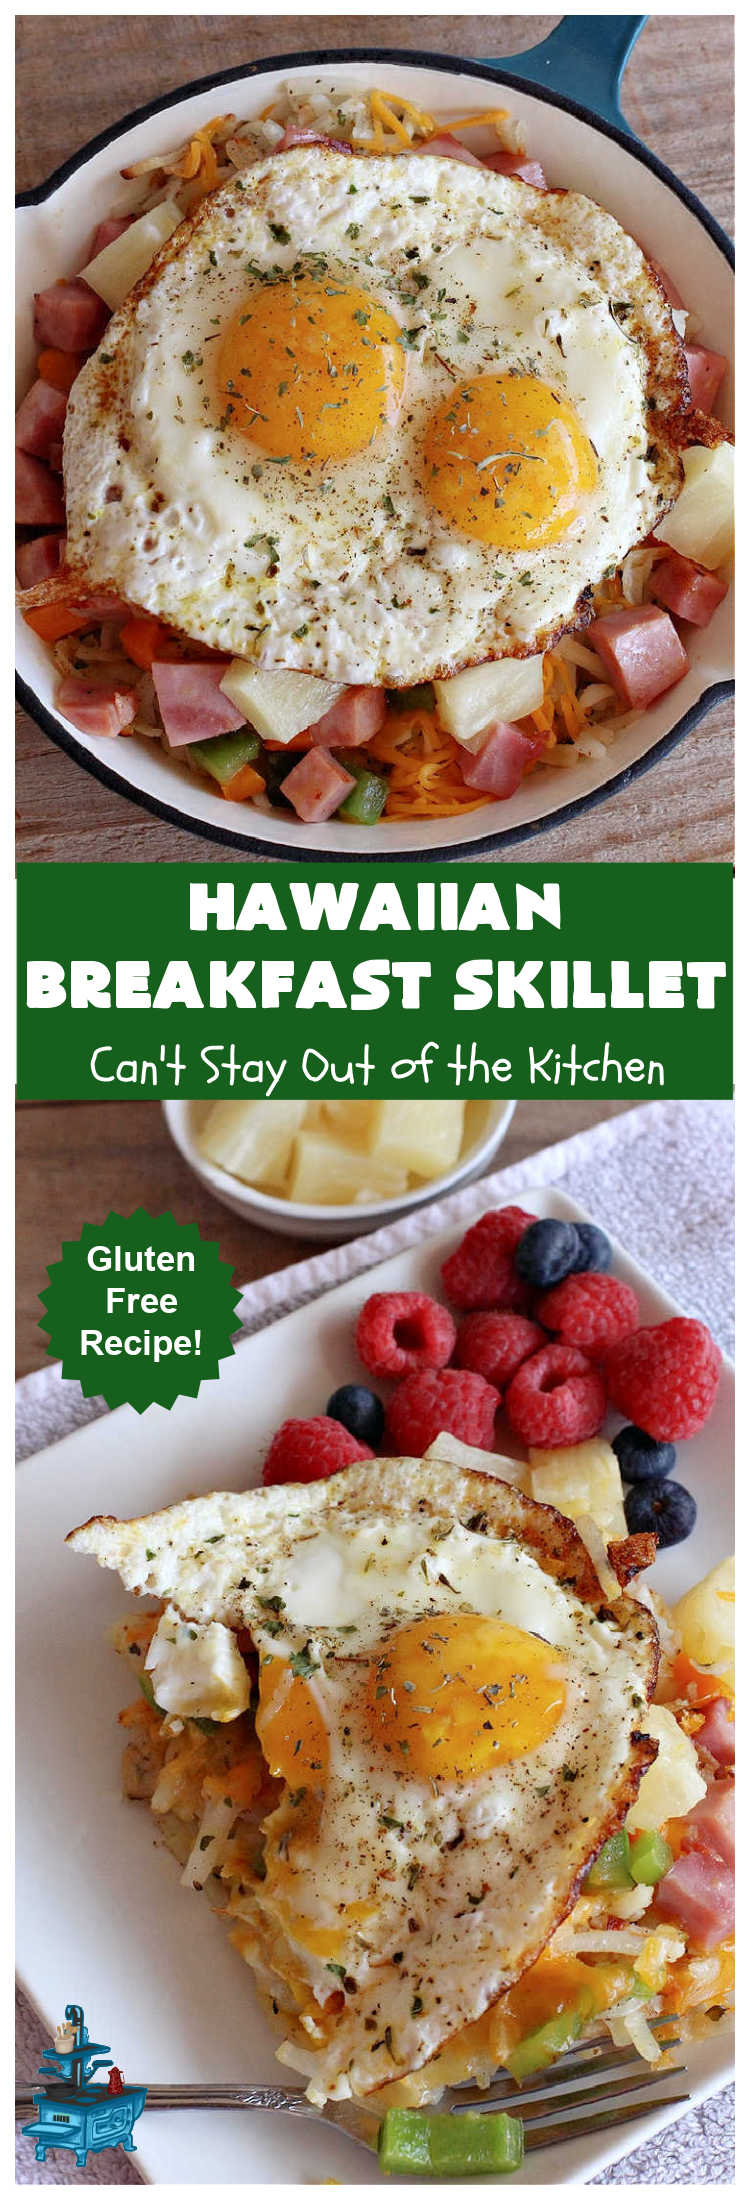 Hawaiian Breakfast Skillet | Can't Stay Out of the Kitchen